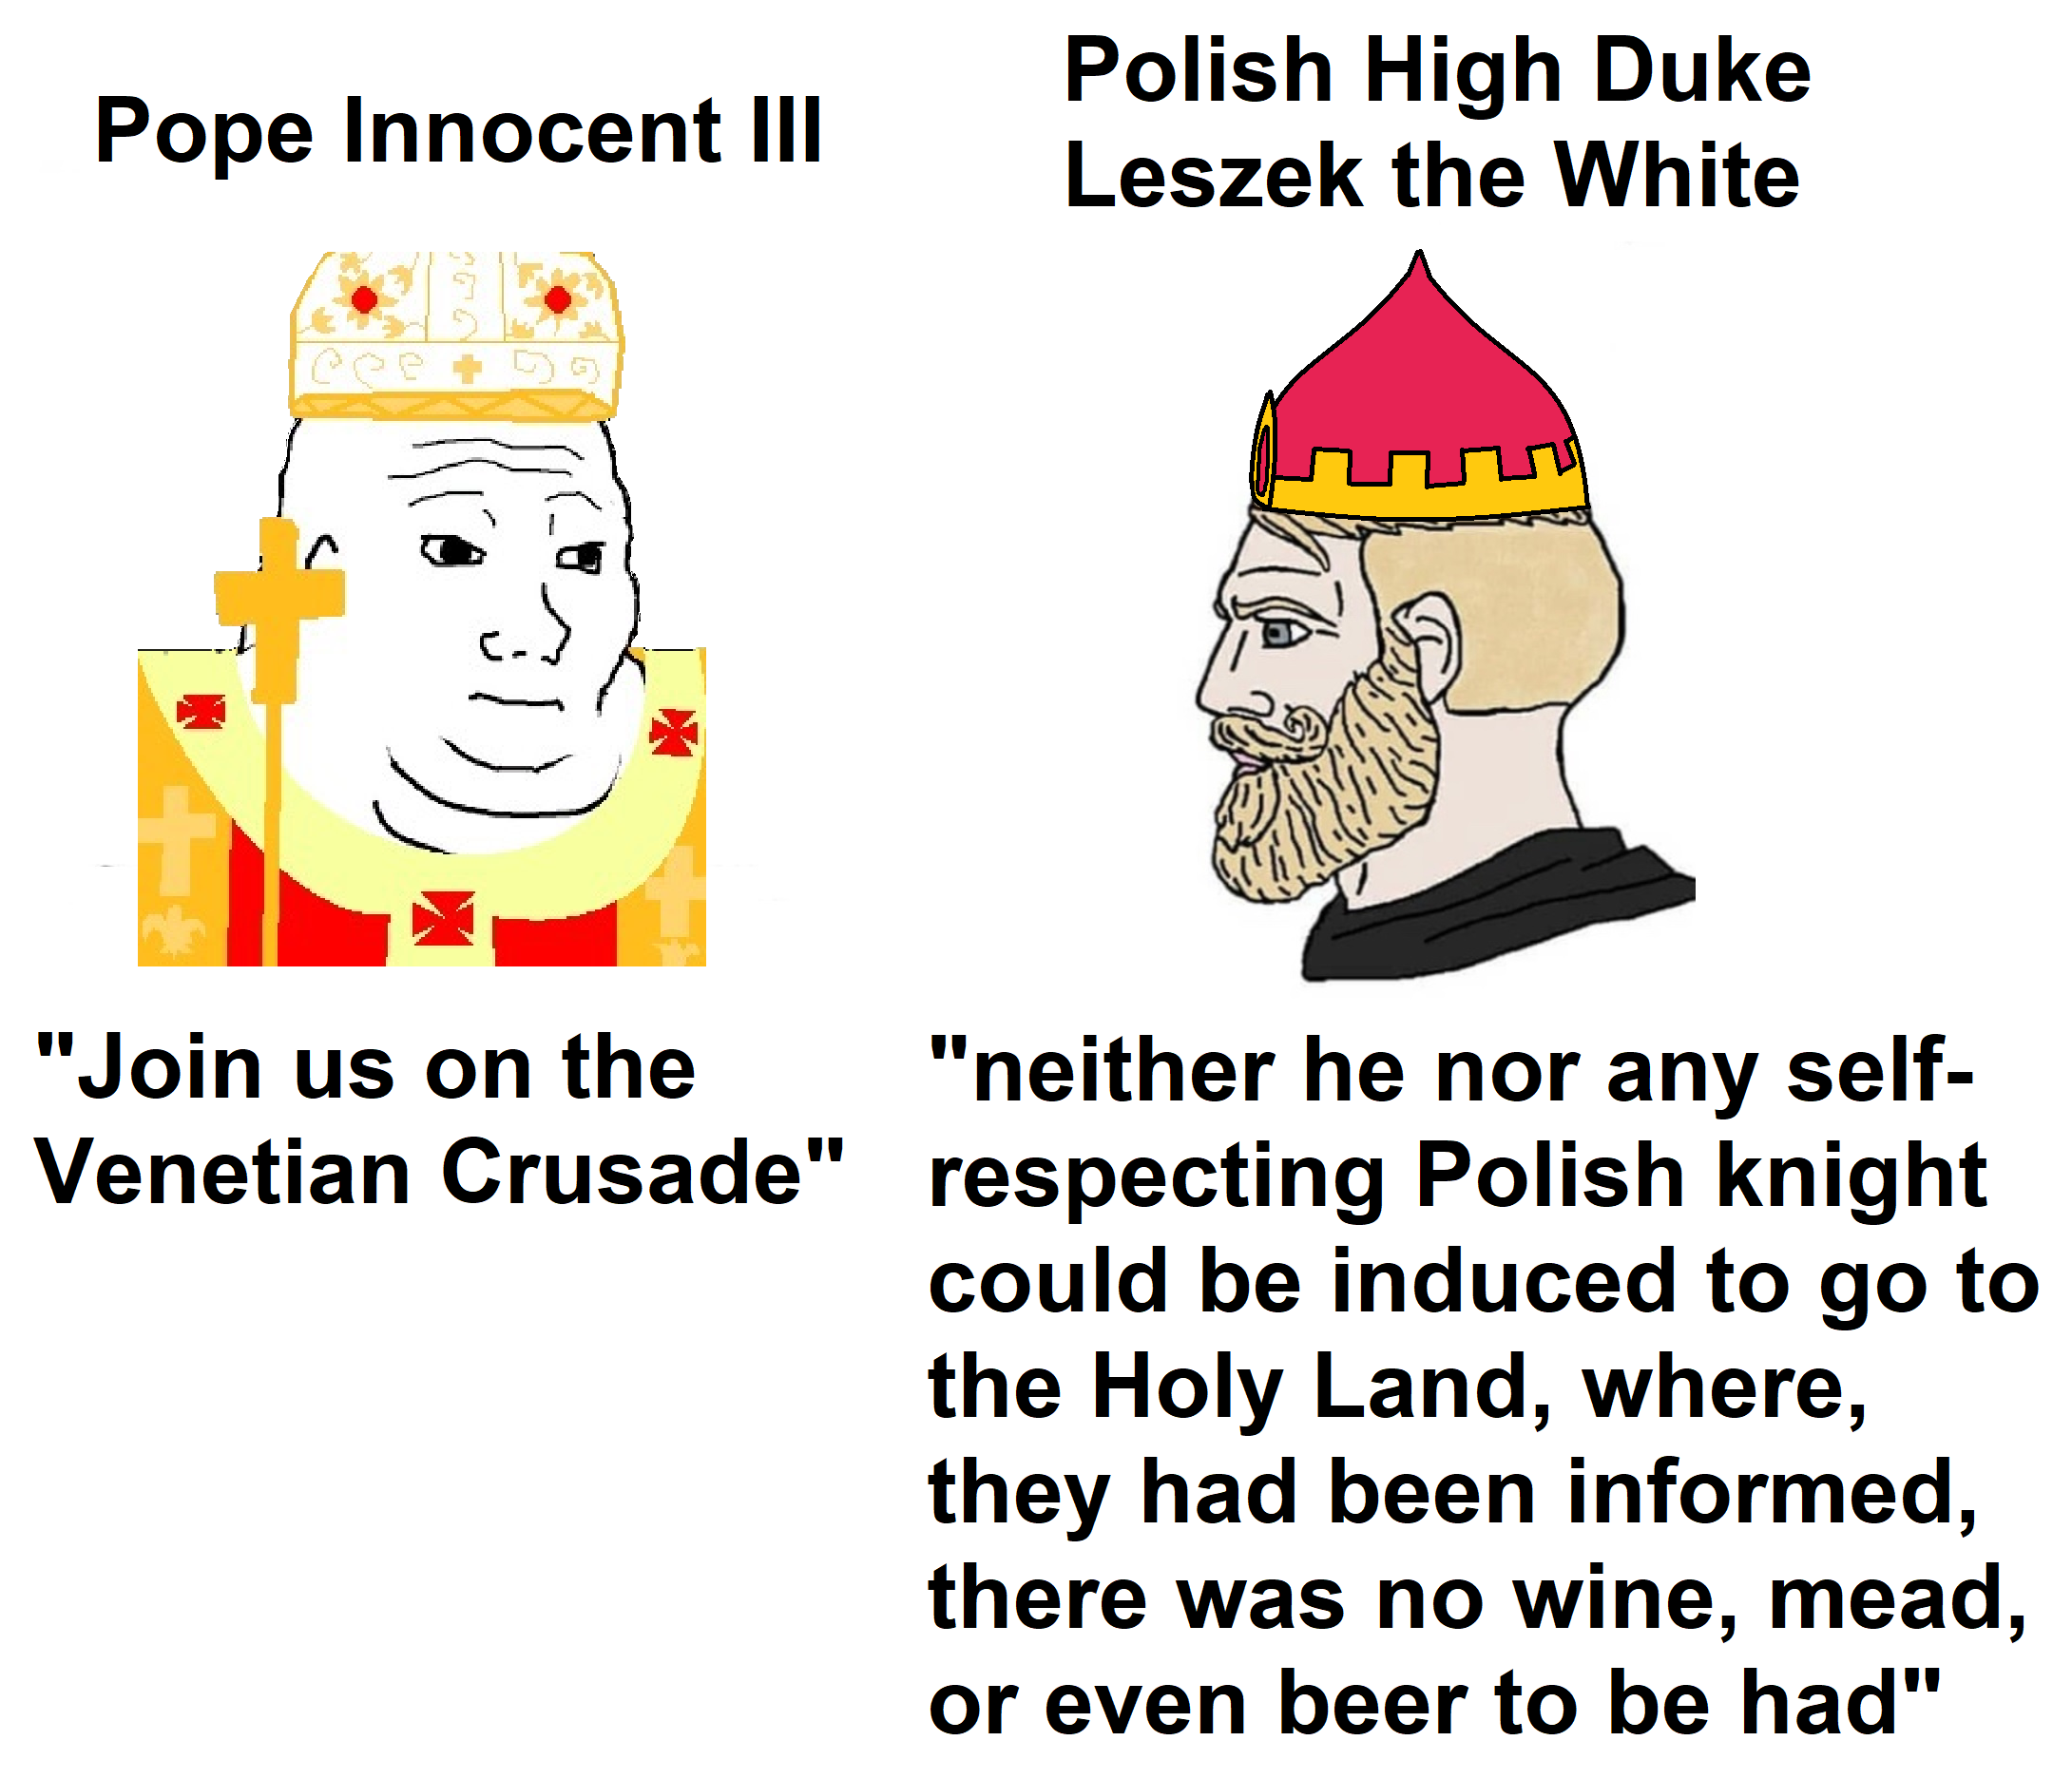 A believable Polish excuse